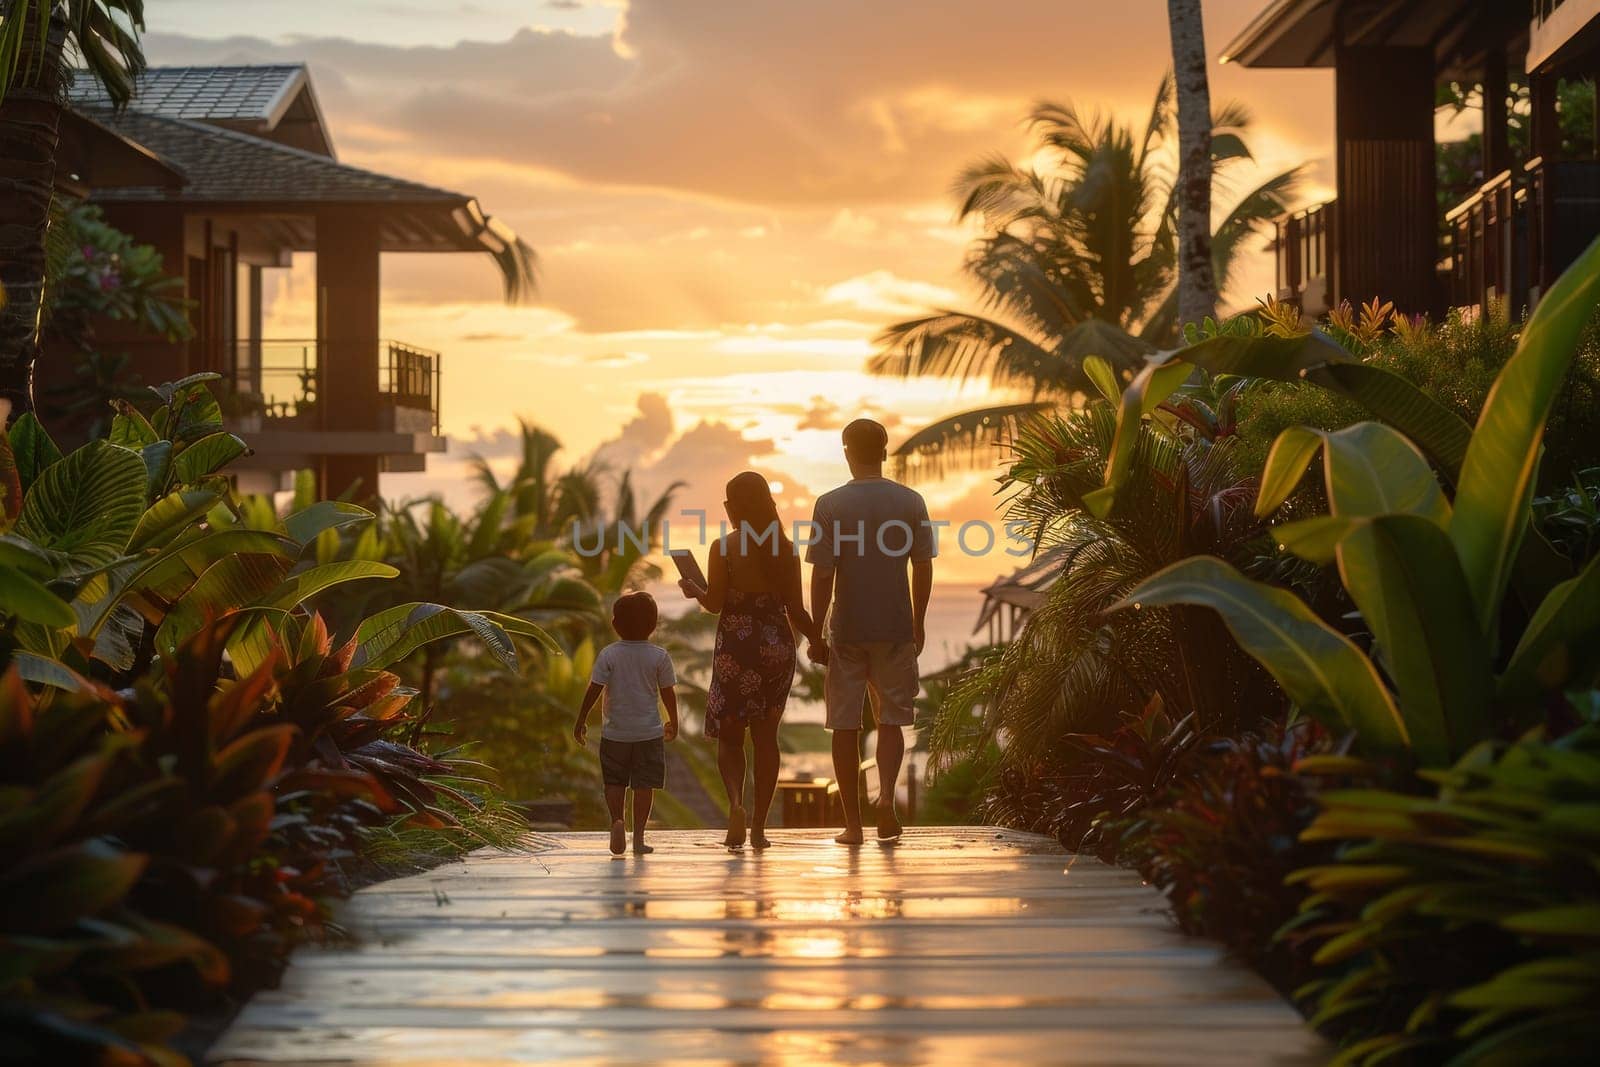 A family walks down a path in a tropical garden. The sun is setting, casting a warm glow over the scene. The family is enjoying a leisurely stroll, taking in the beauty of the garden